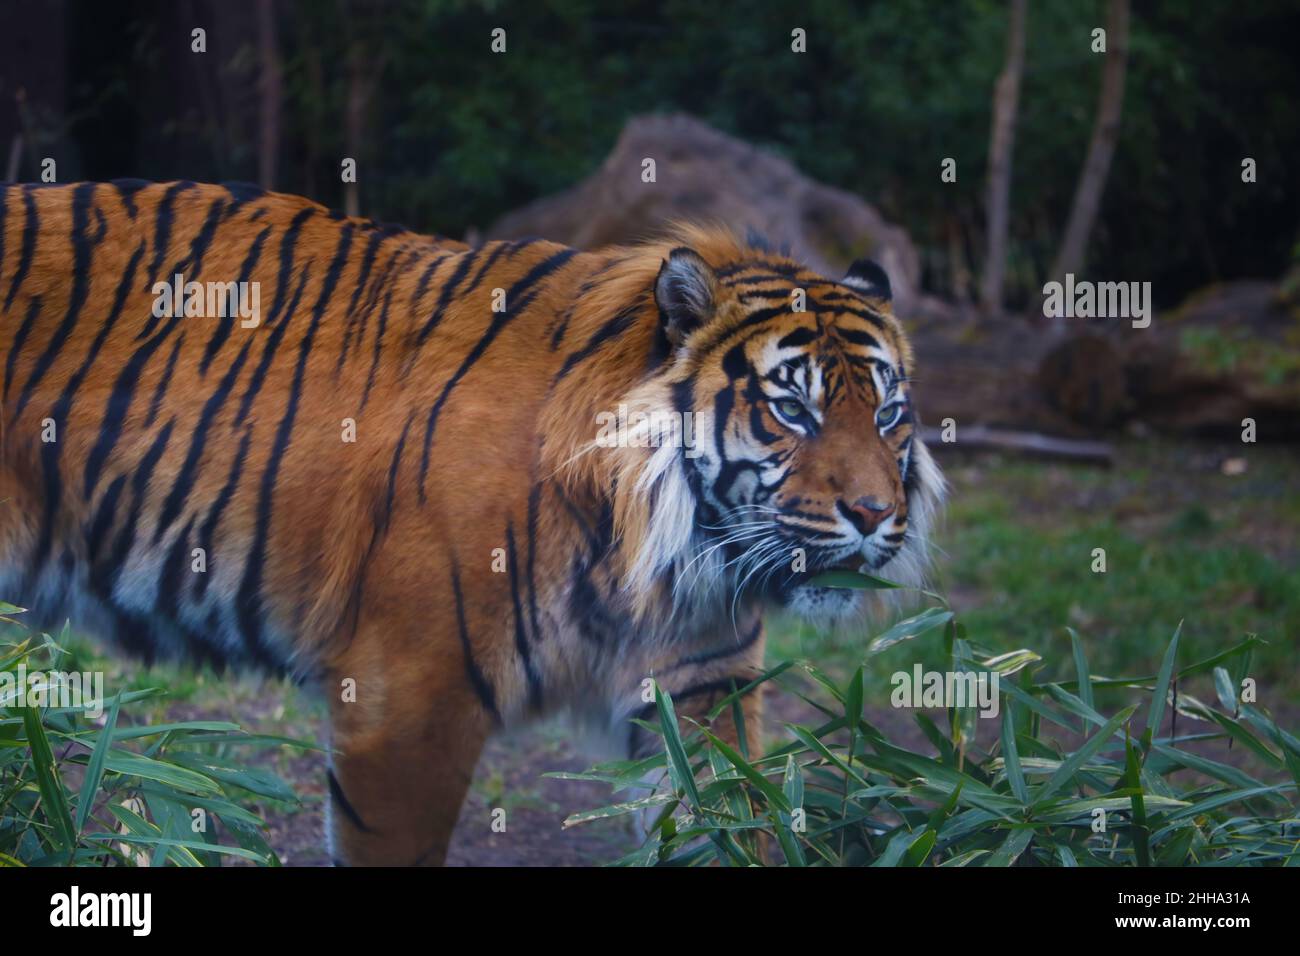 Out of focus. Selective focus. Tiger in the wild, greenery. Stock Photo